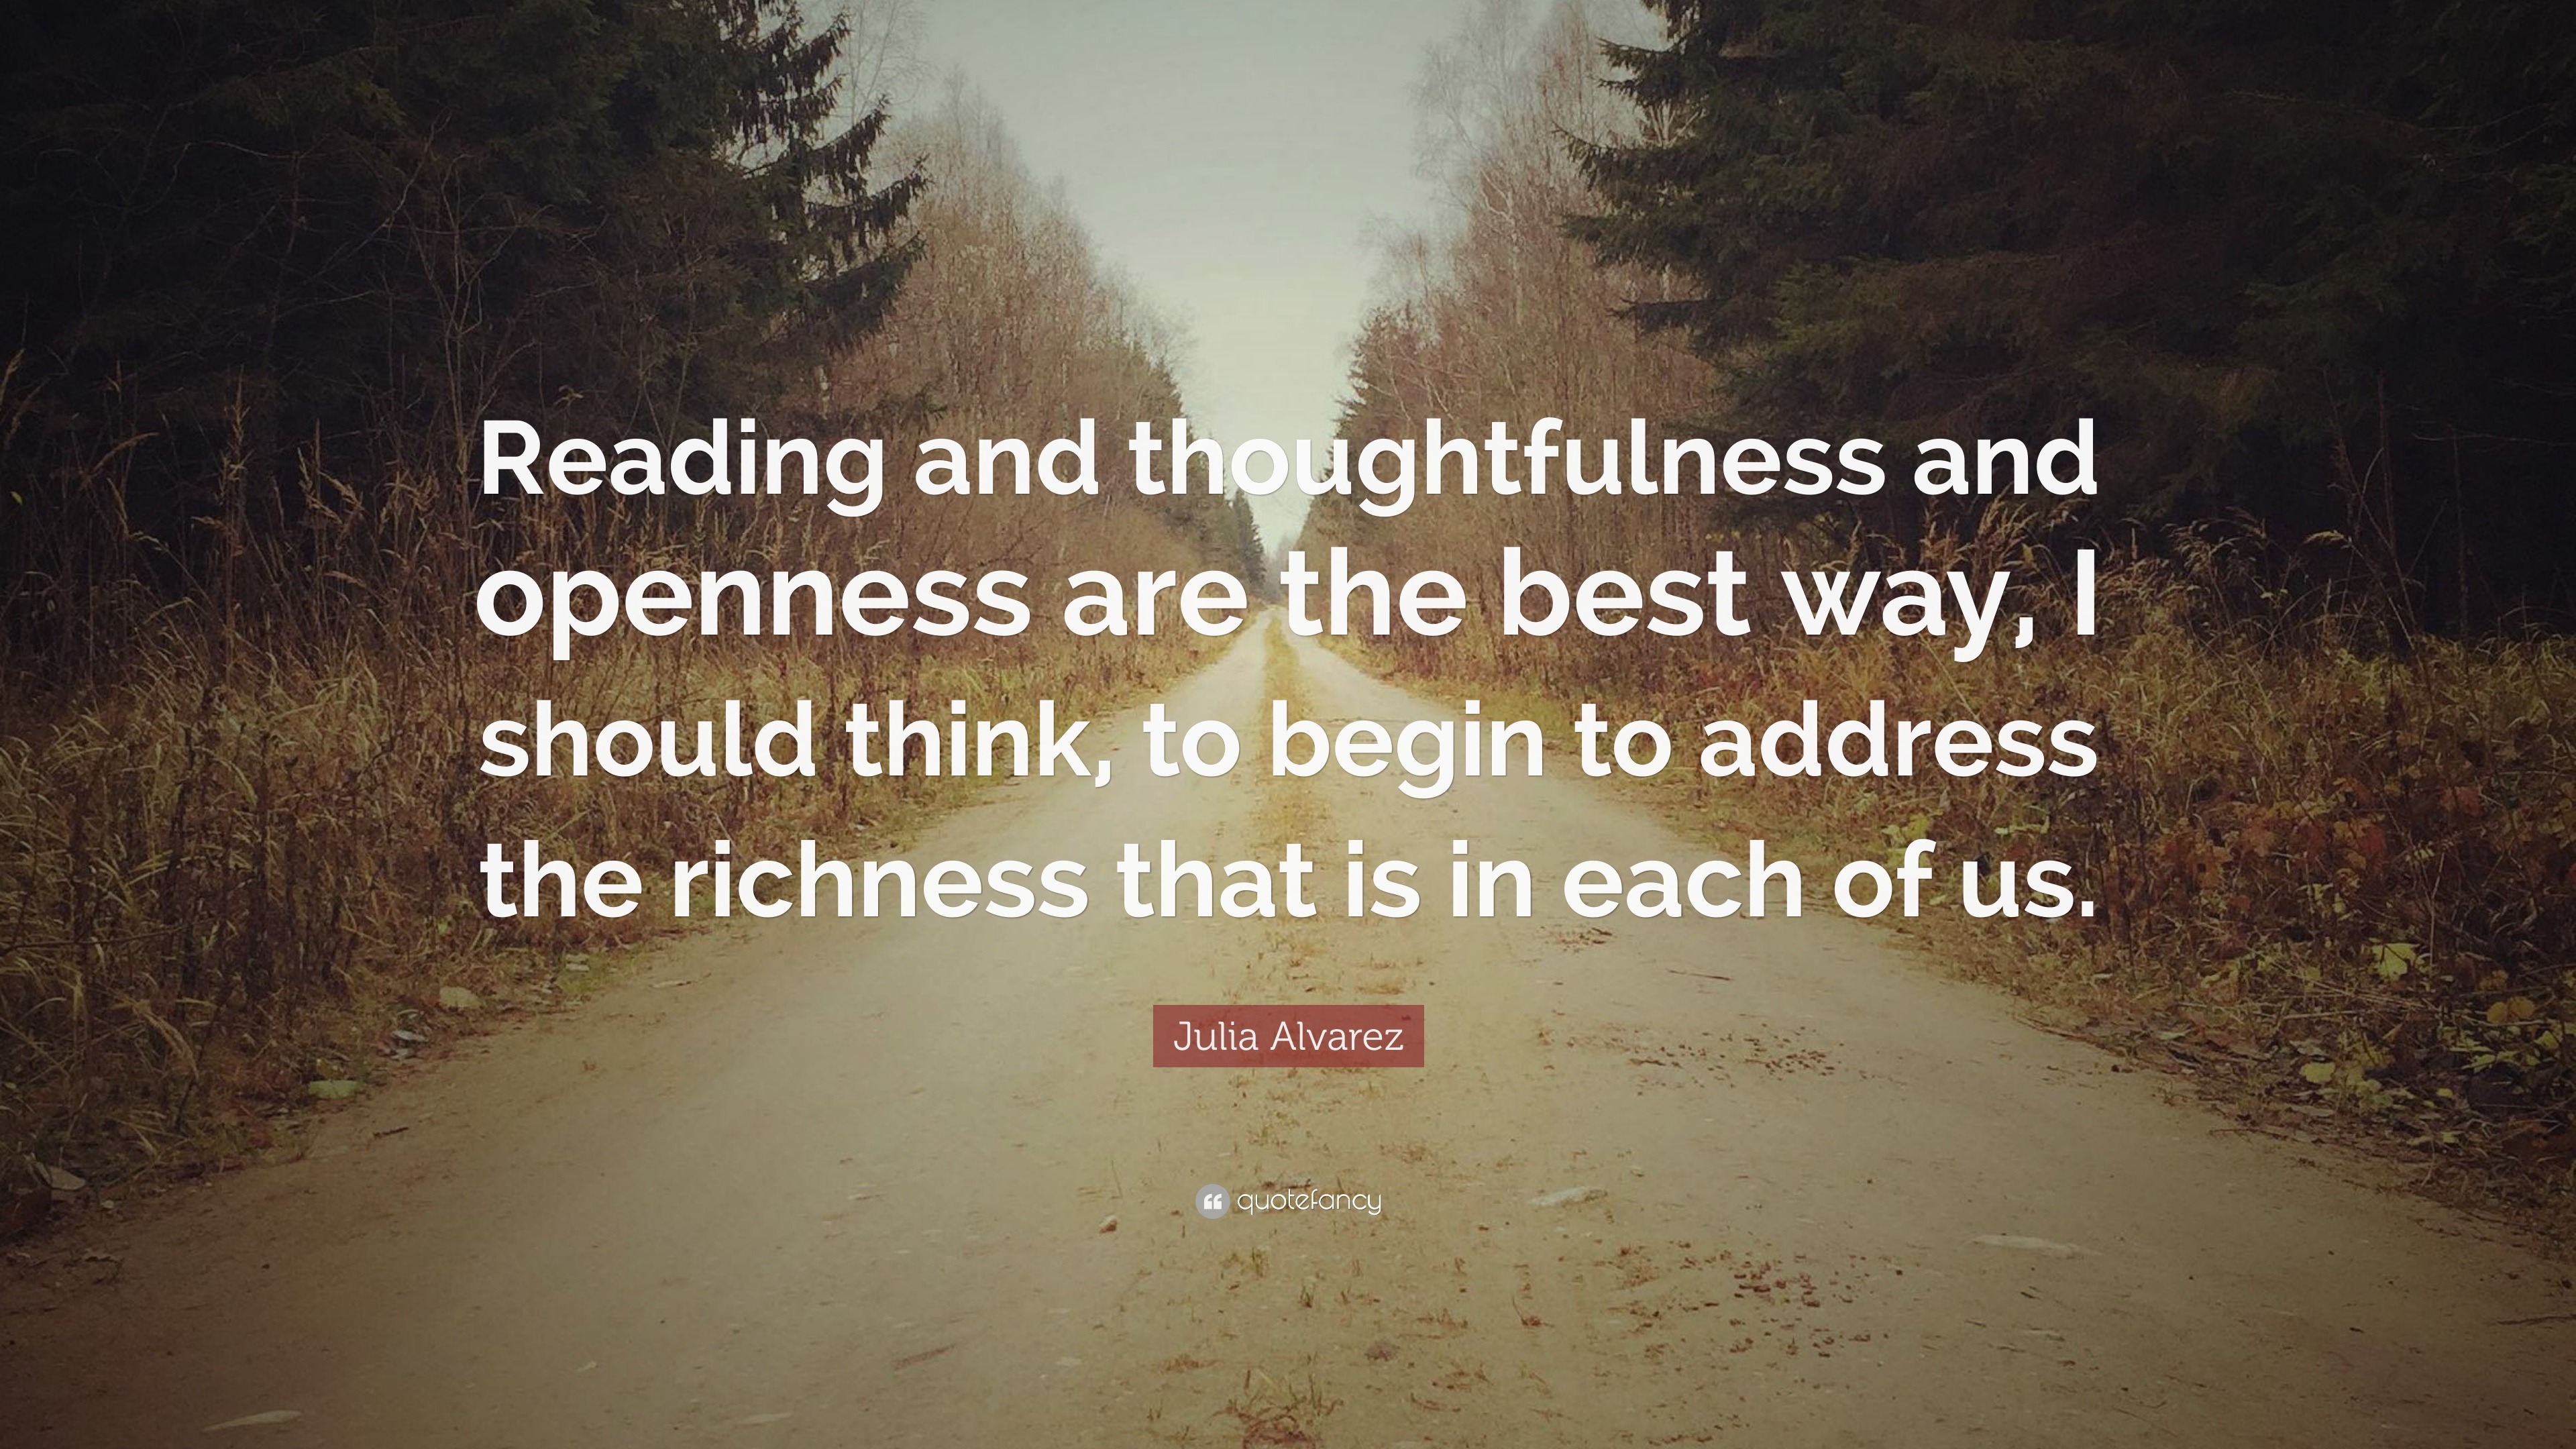 Julia Alvarez Quote: “Reading and thoughtfulness and openness are the ...